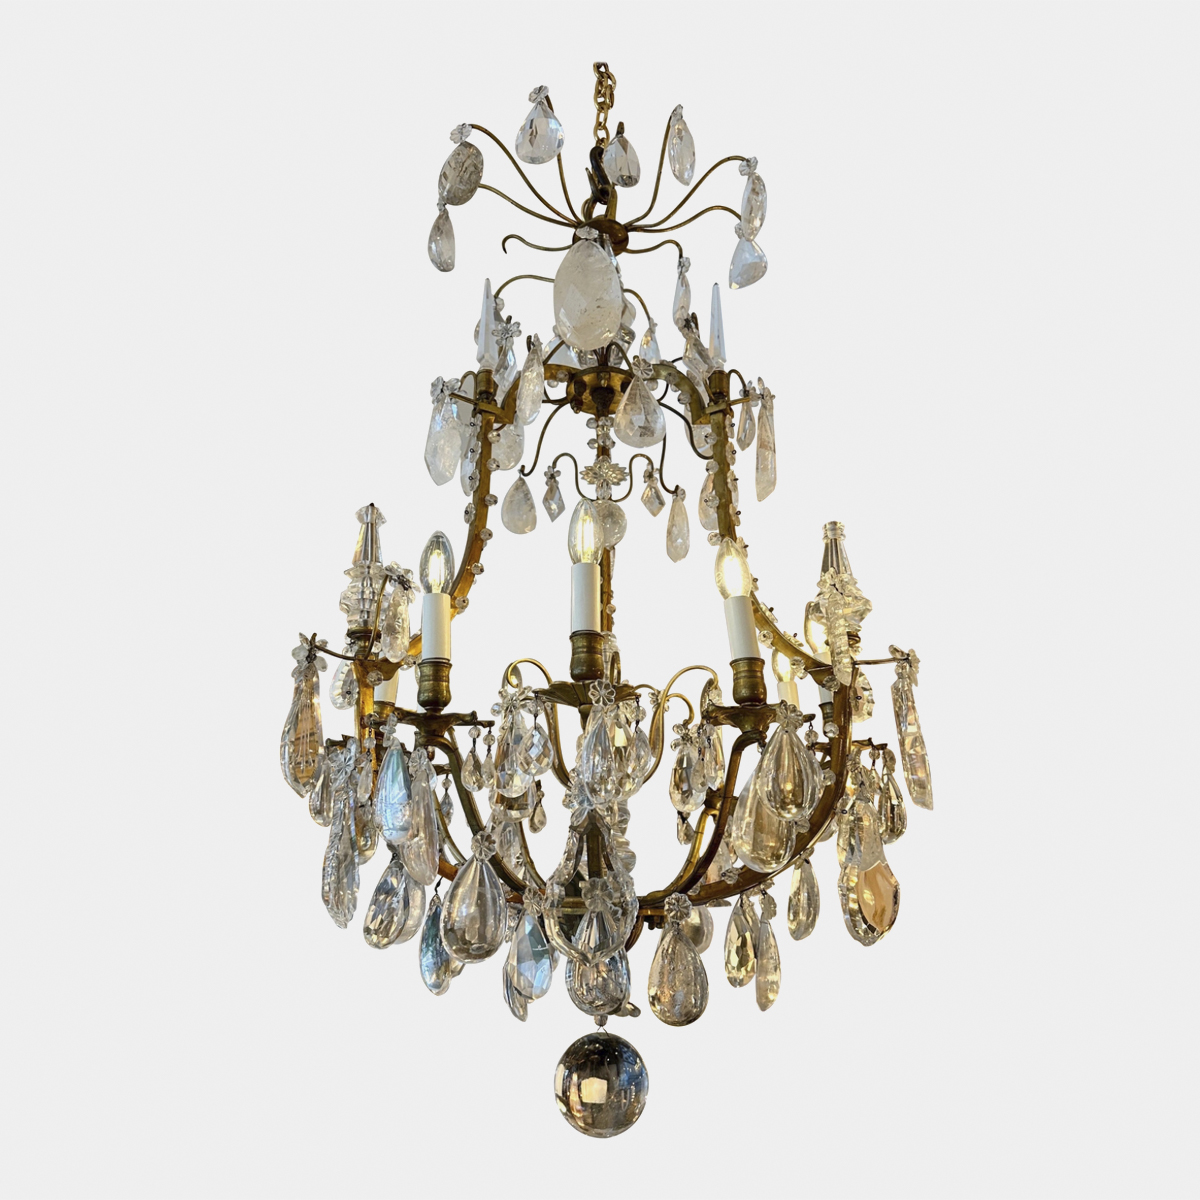 A Large Antique French Rock Crystal and Gilt Bronze Chandelier